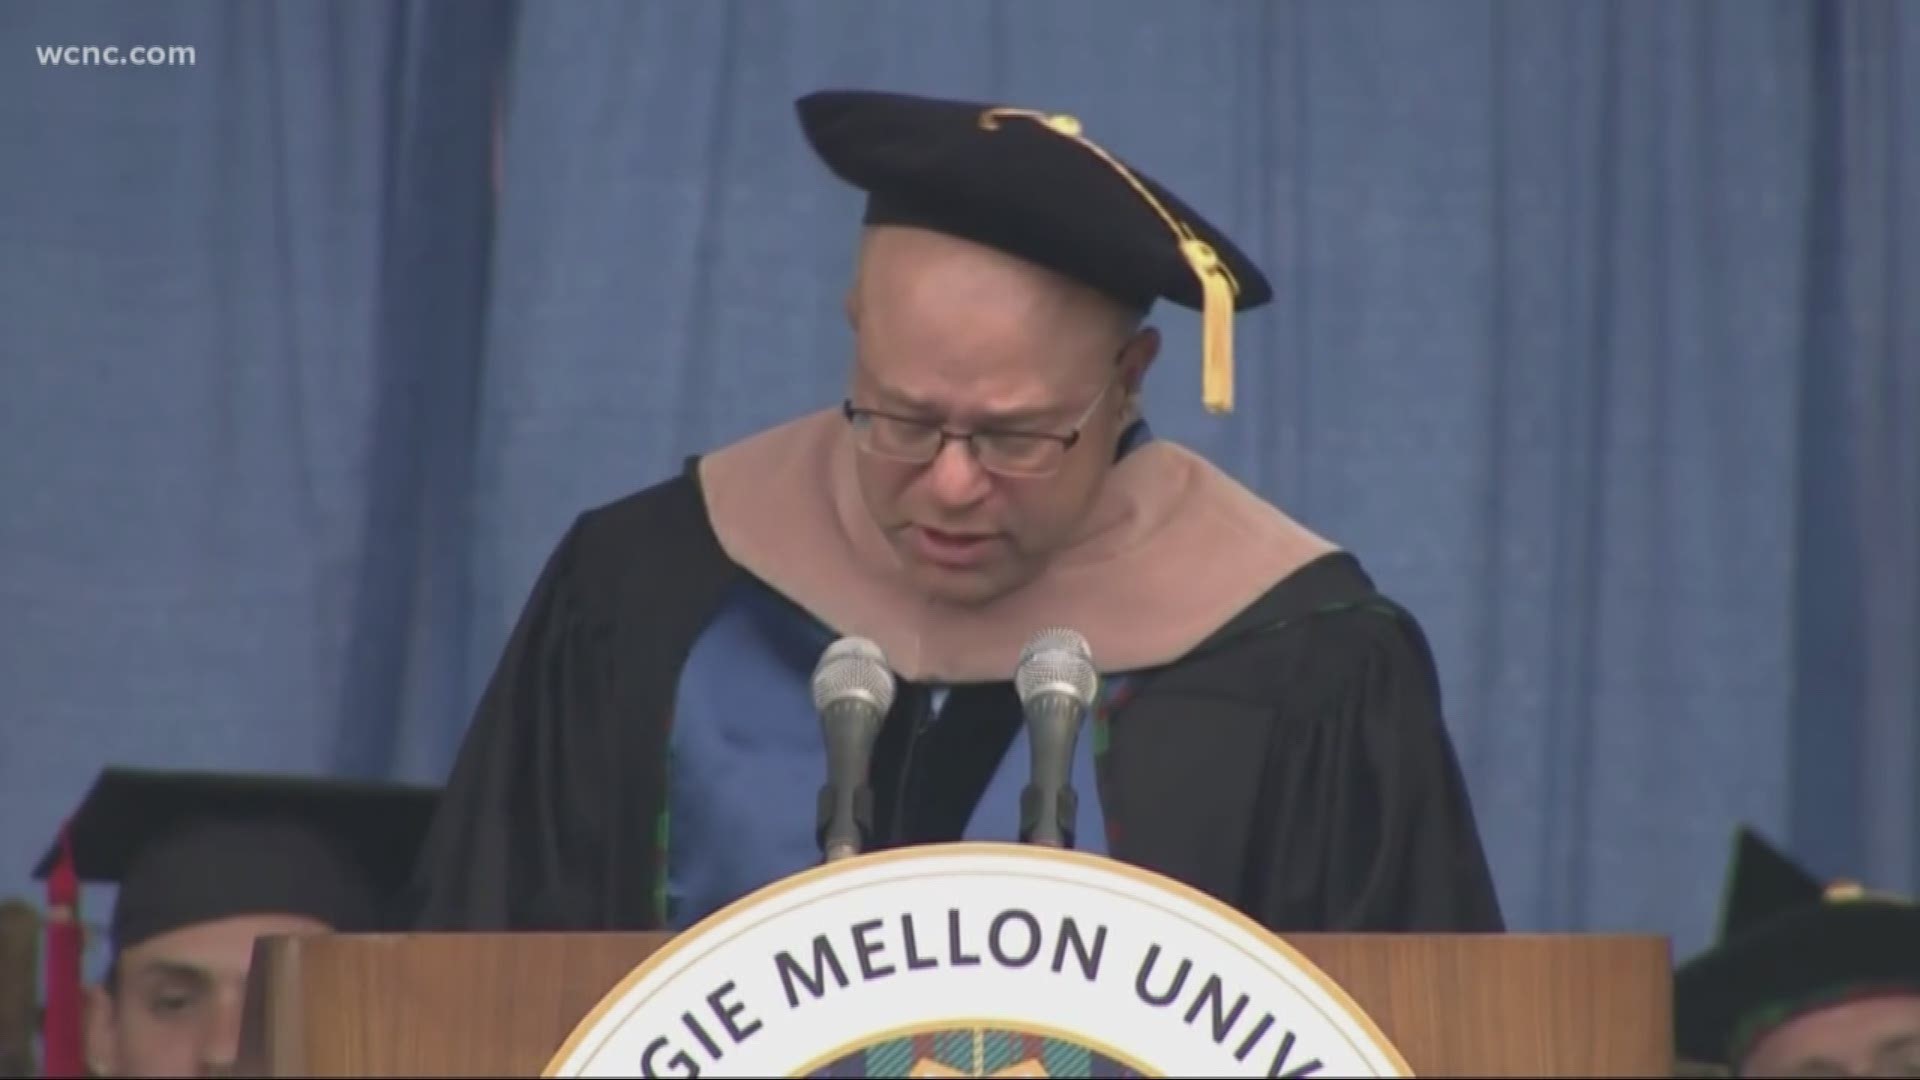 Impending Panthers owner David Tepper opened up about his life during a commencement ceremony at Carnegie Mellon University Sunday.